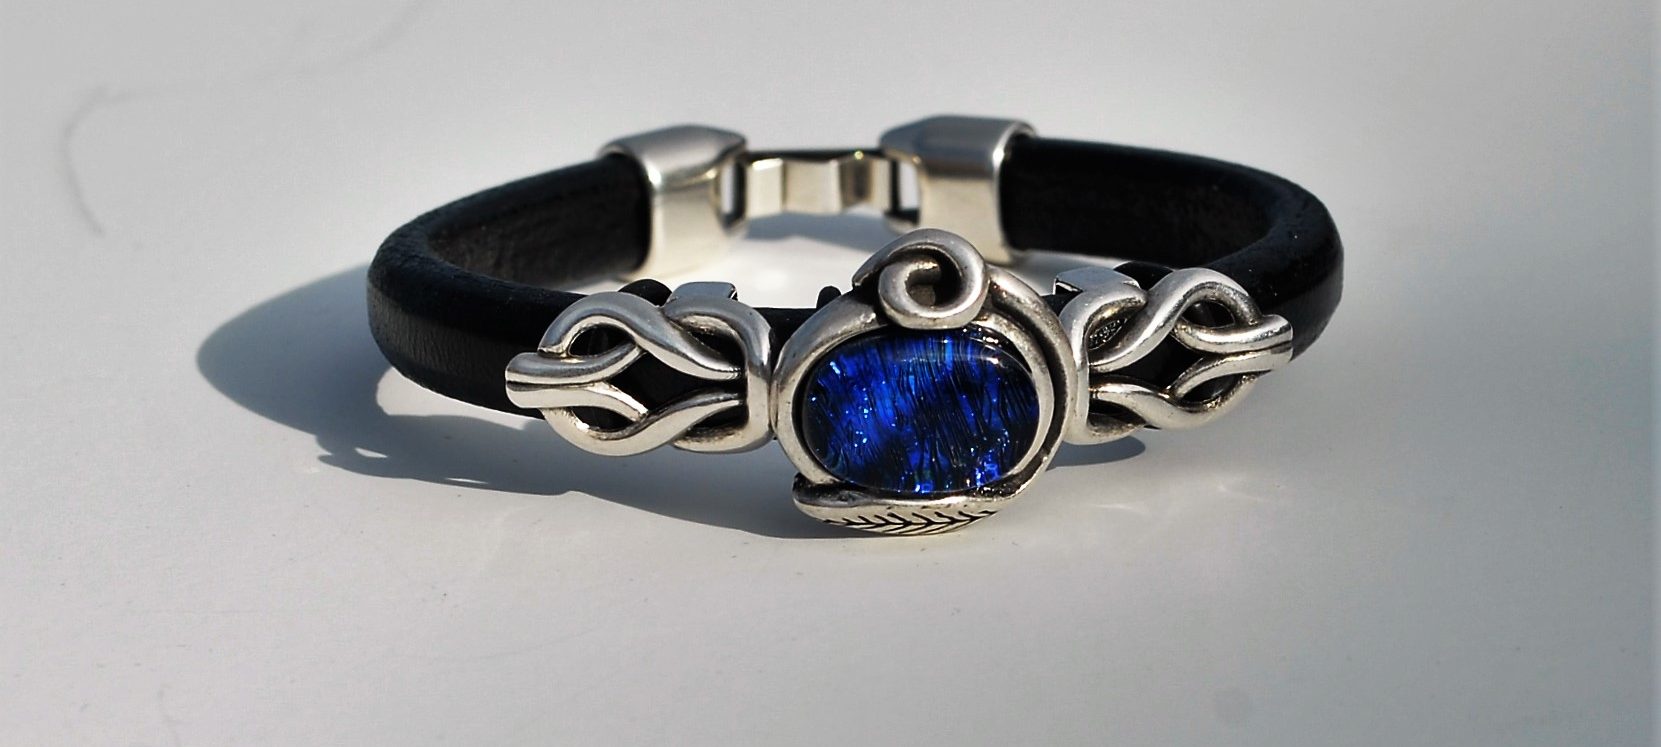 Leather Bracelet with Silver Setting and Fused Dichroic Glass Cabochon